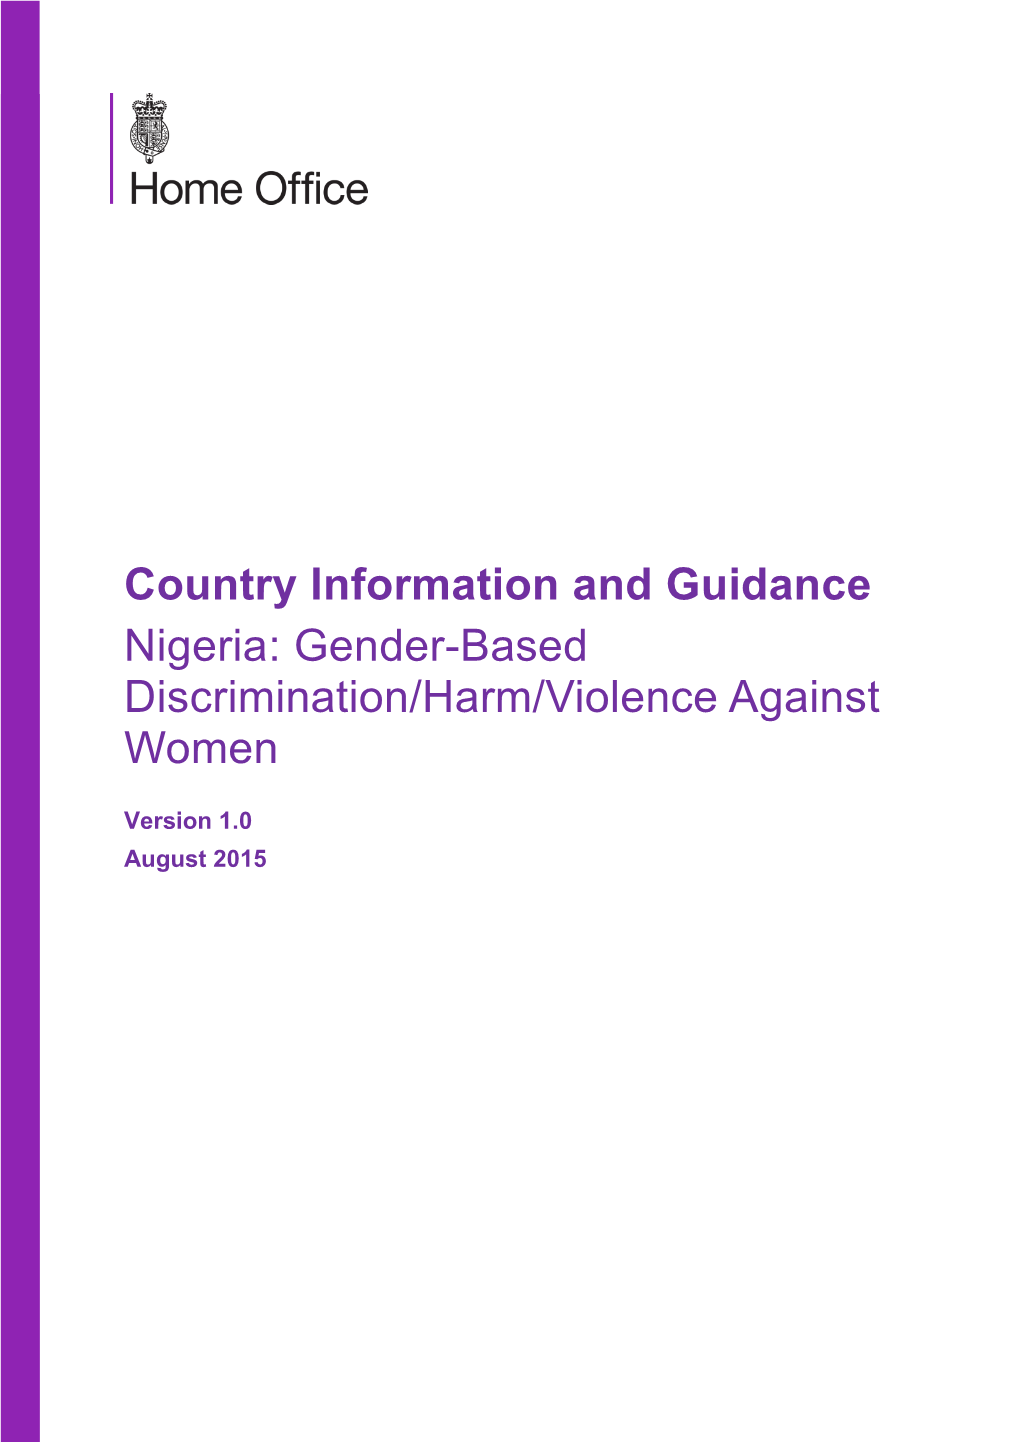 Country Information and Guidance Nigeria: Gender-Based Discrimination/Harm/Violence Against Women